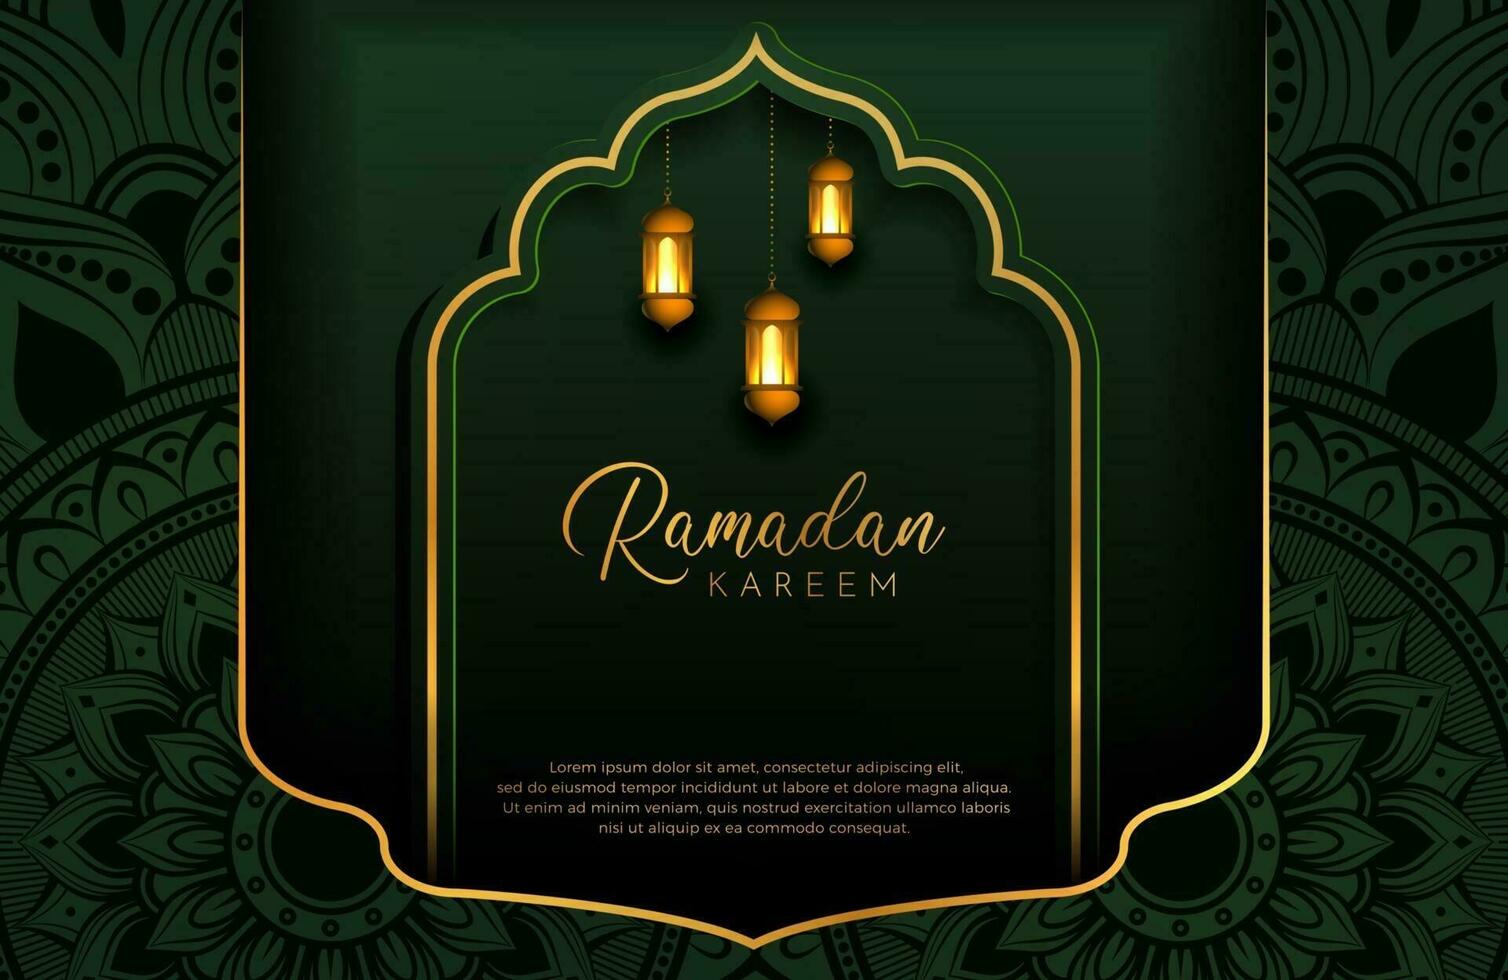 Ramadan Kareem background with gold and green color luxury style Vector illustration for Islamic holy month celebrations decorated with lantern and mandala arabesque